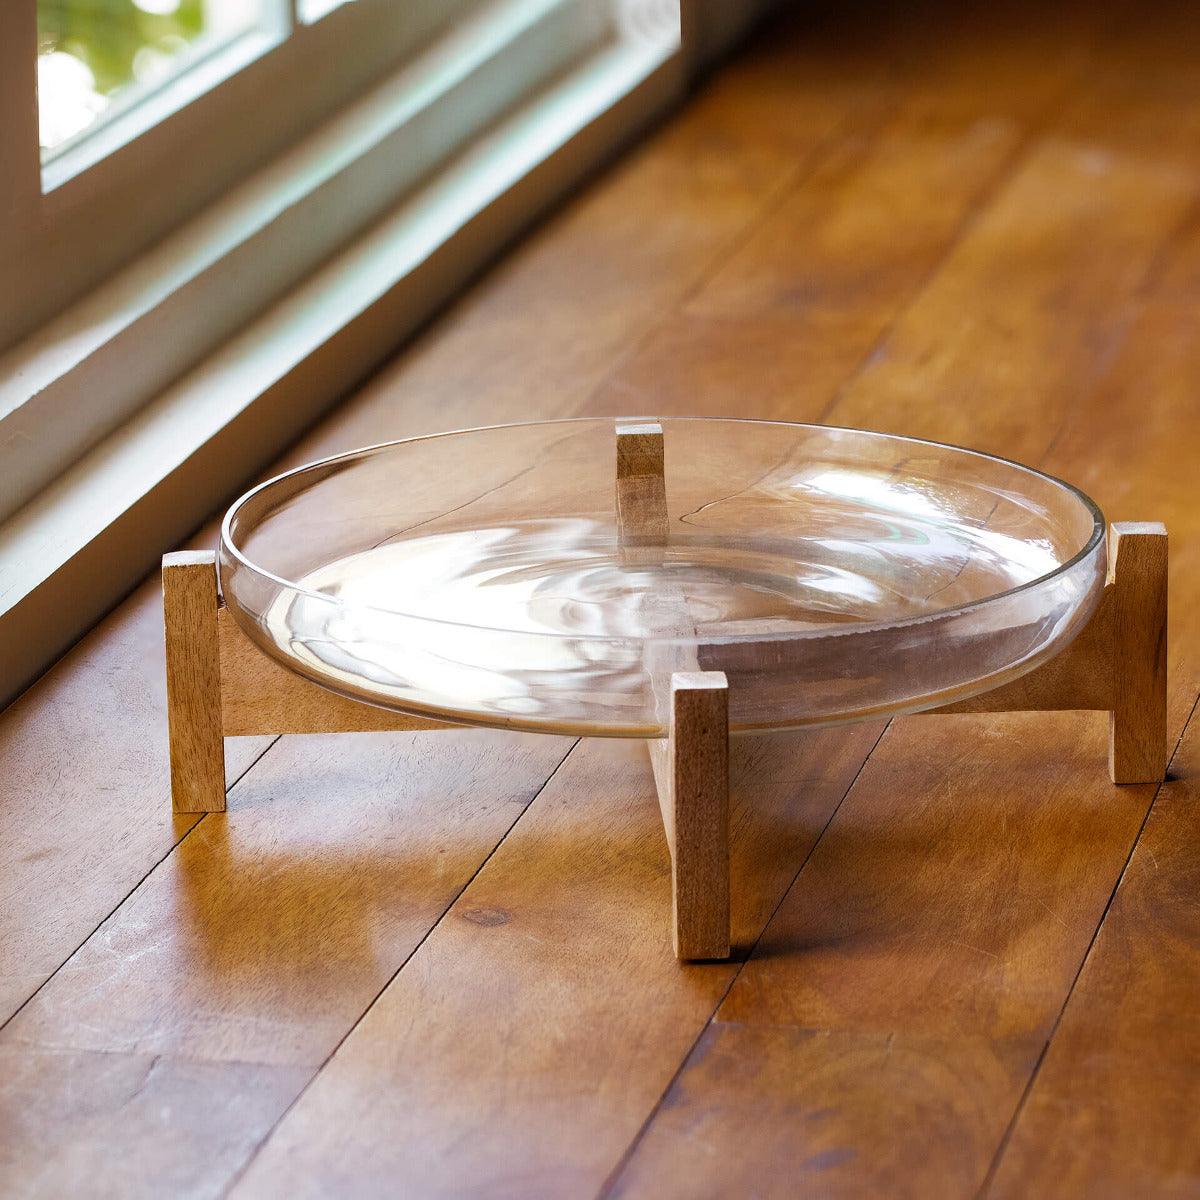 clear glass bowl with wooden stand